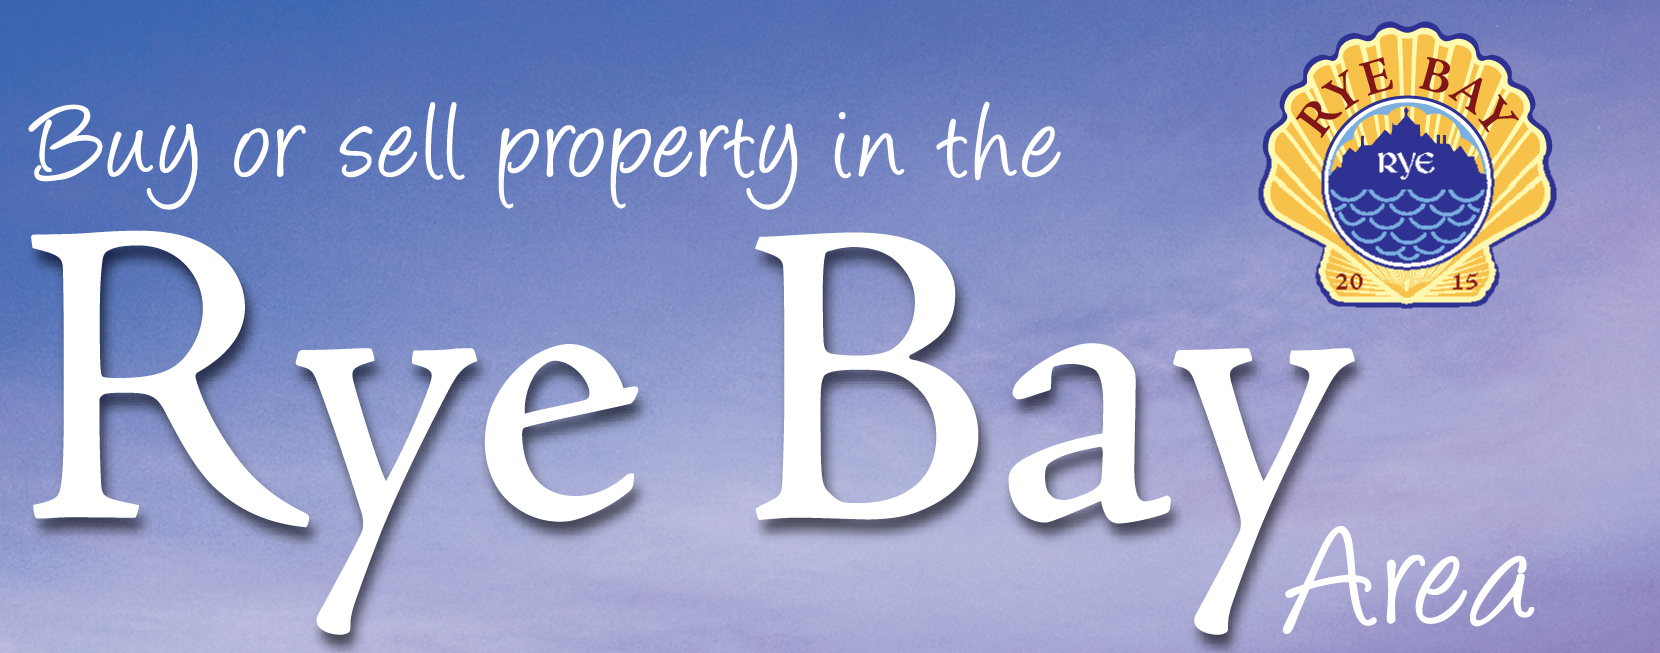 Buy a Property in the Rye Bay Area